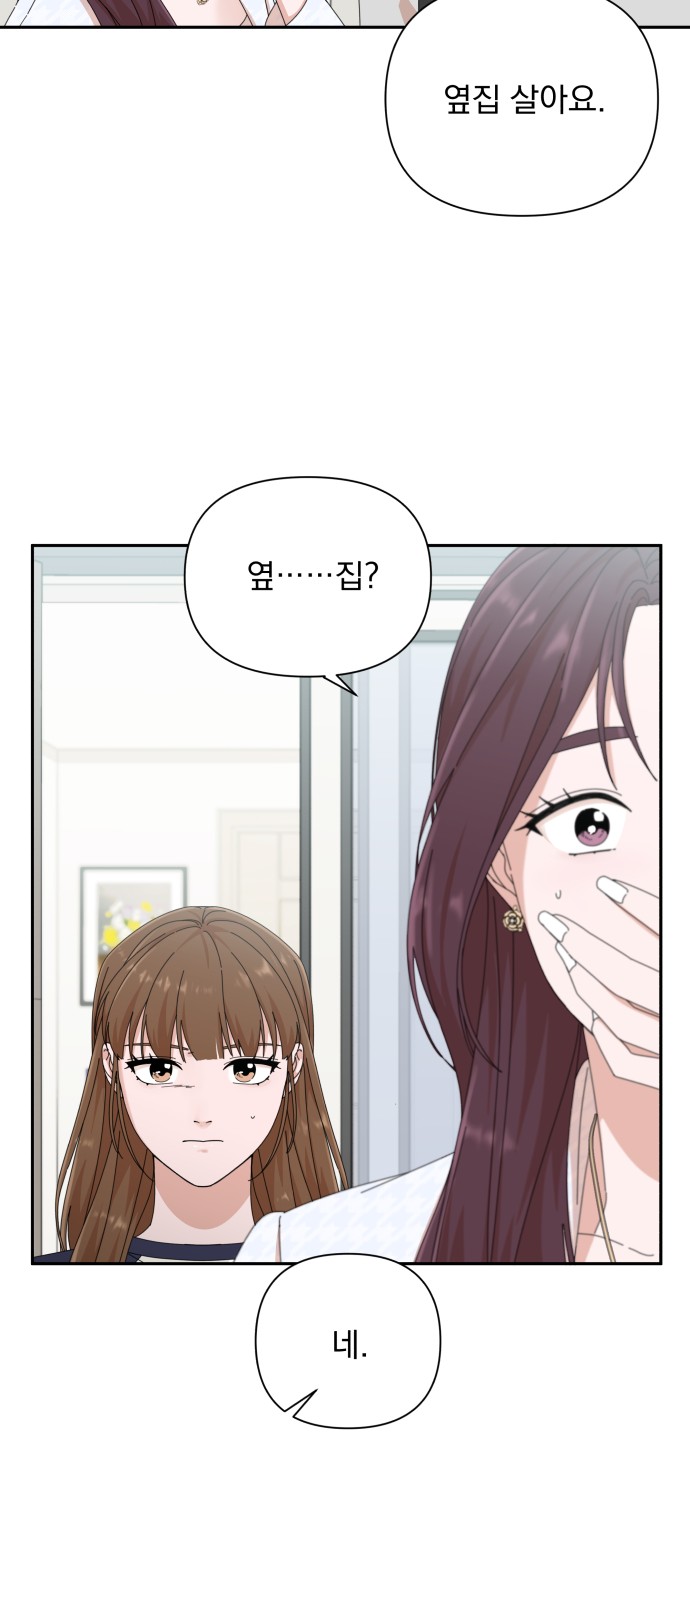 The Man With Pretty Lips - Chapter 26 - Page 4